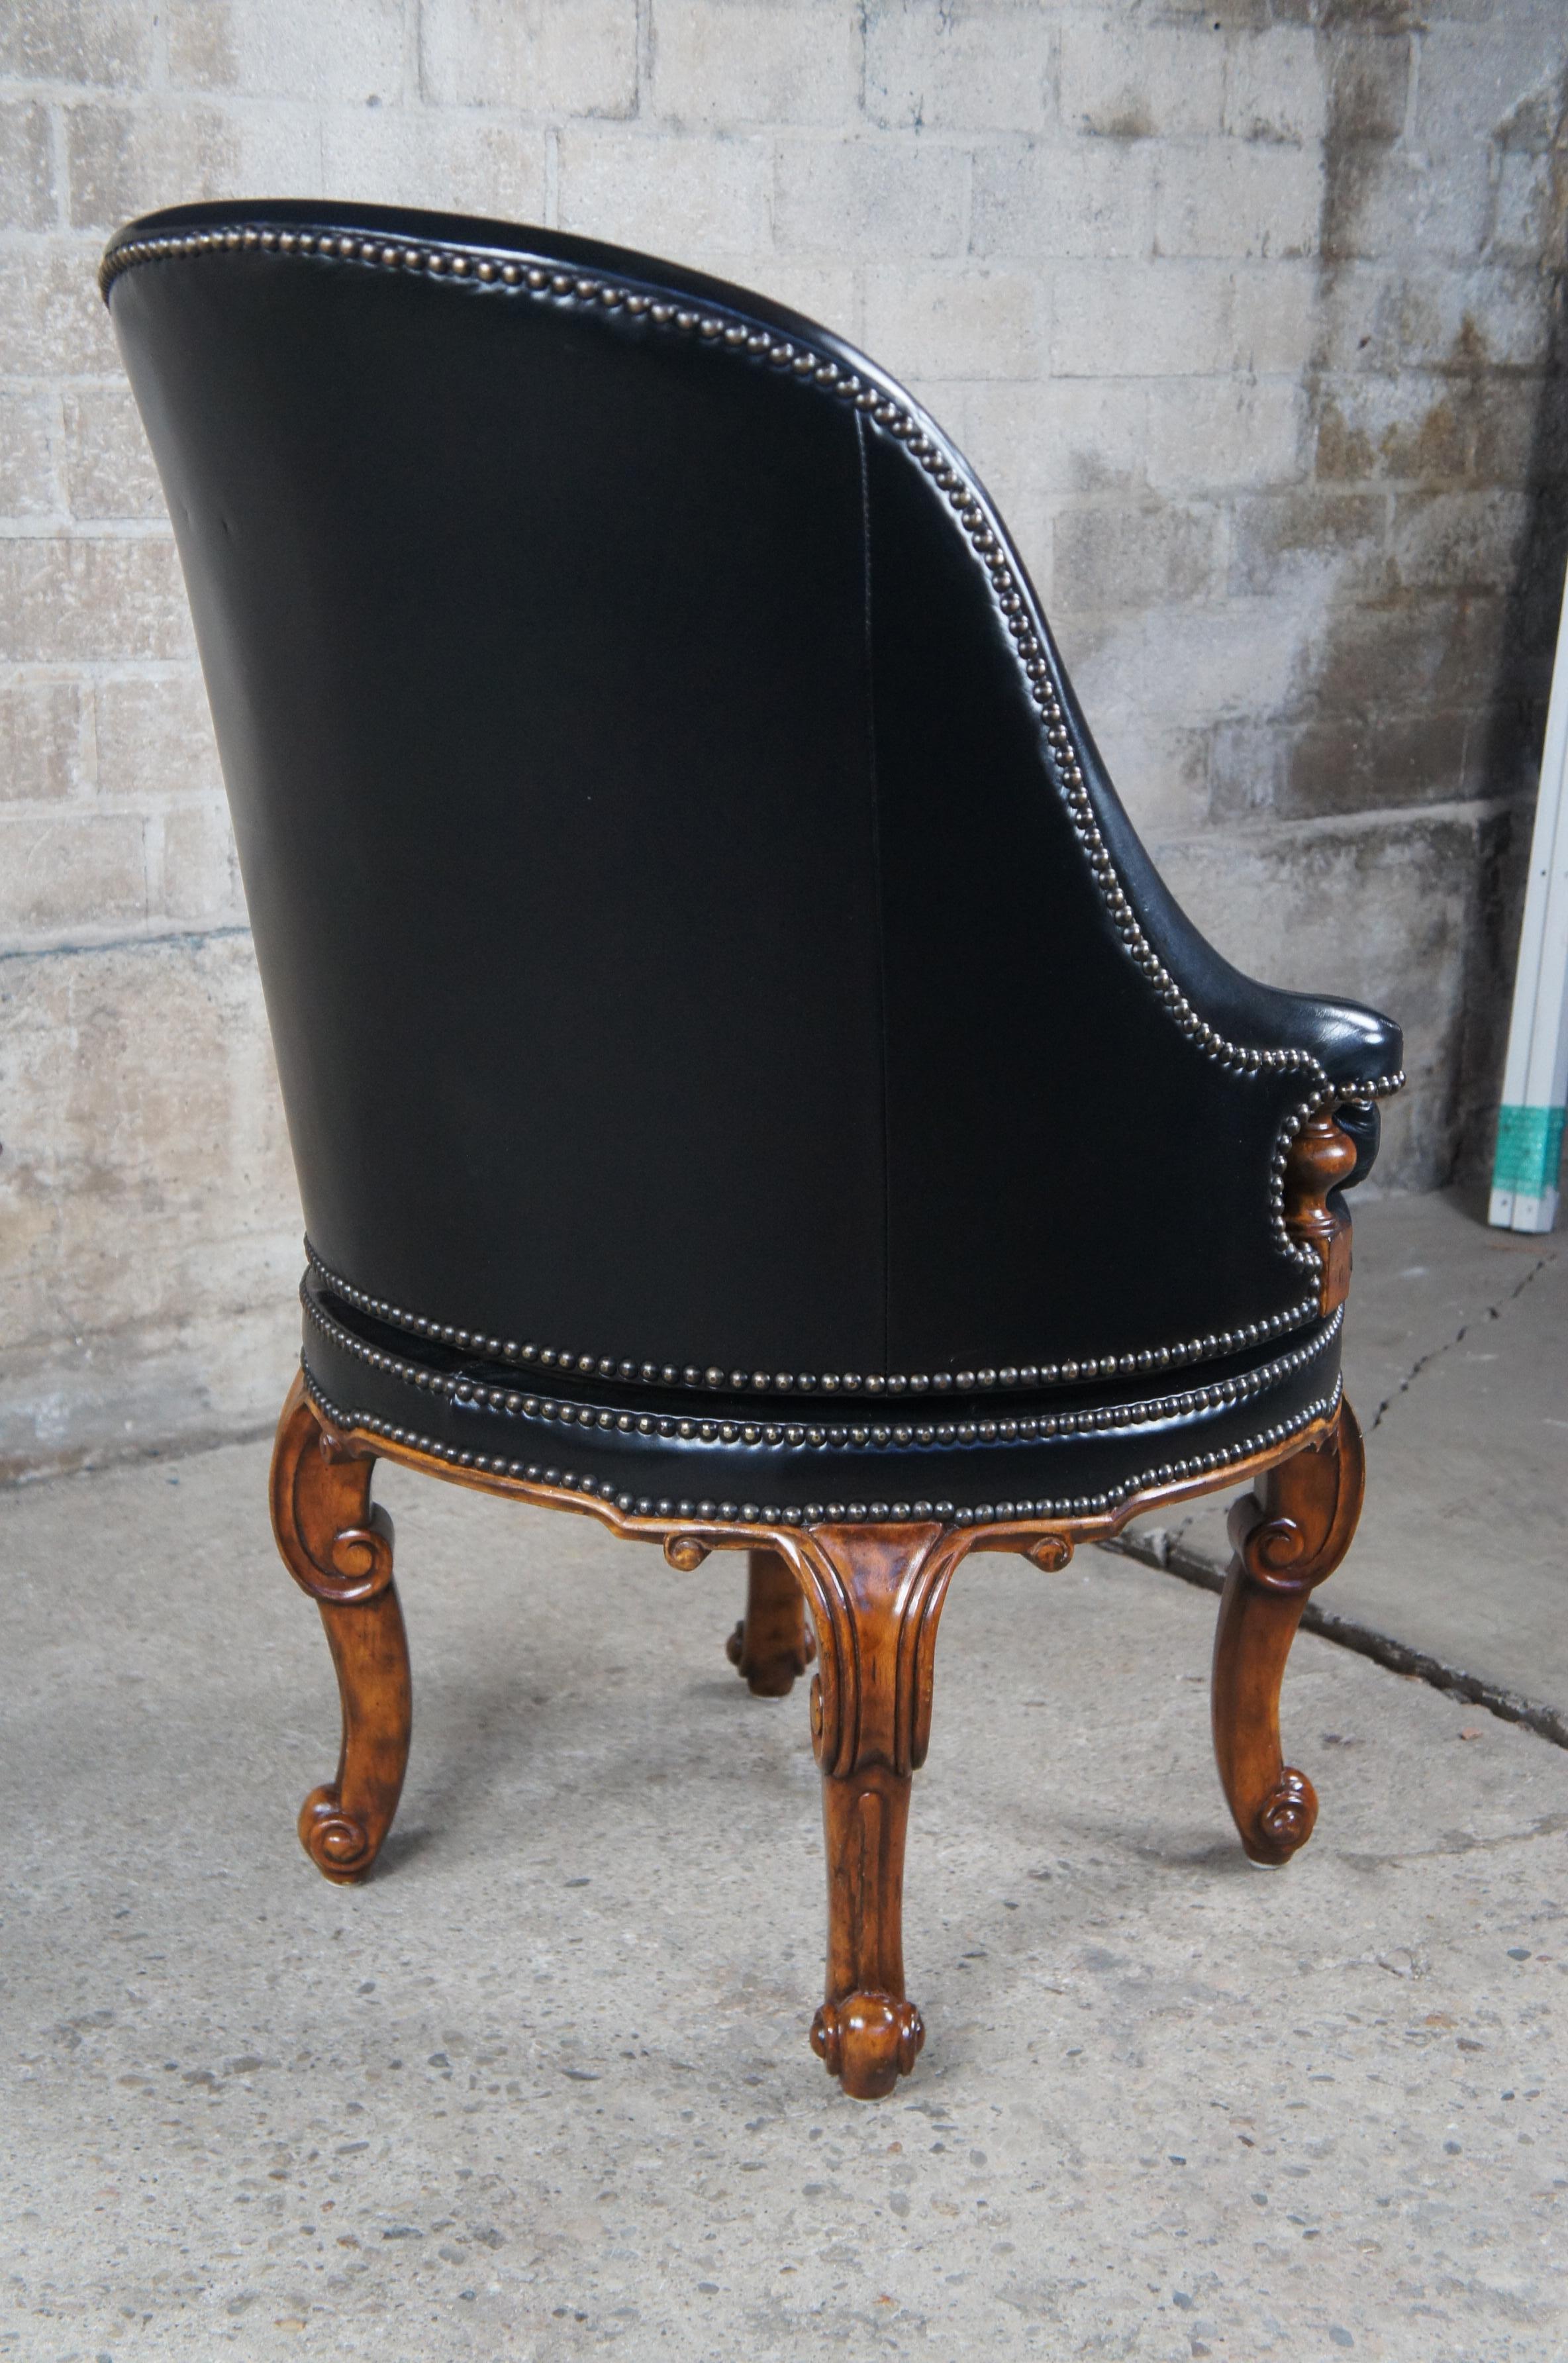 20th Century Maitland Smith Traditional Black Leather Spoon Back Swivel Game Desk Chair 4330